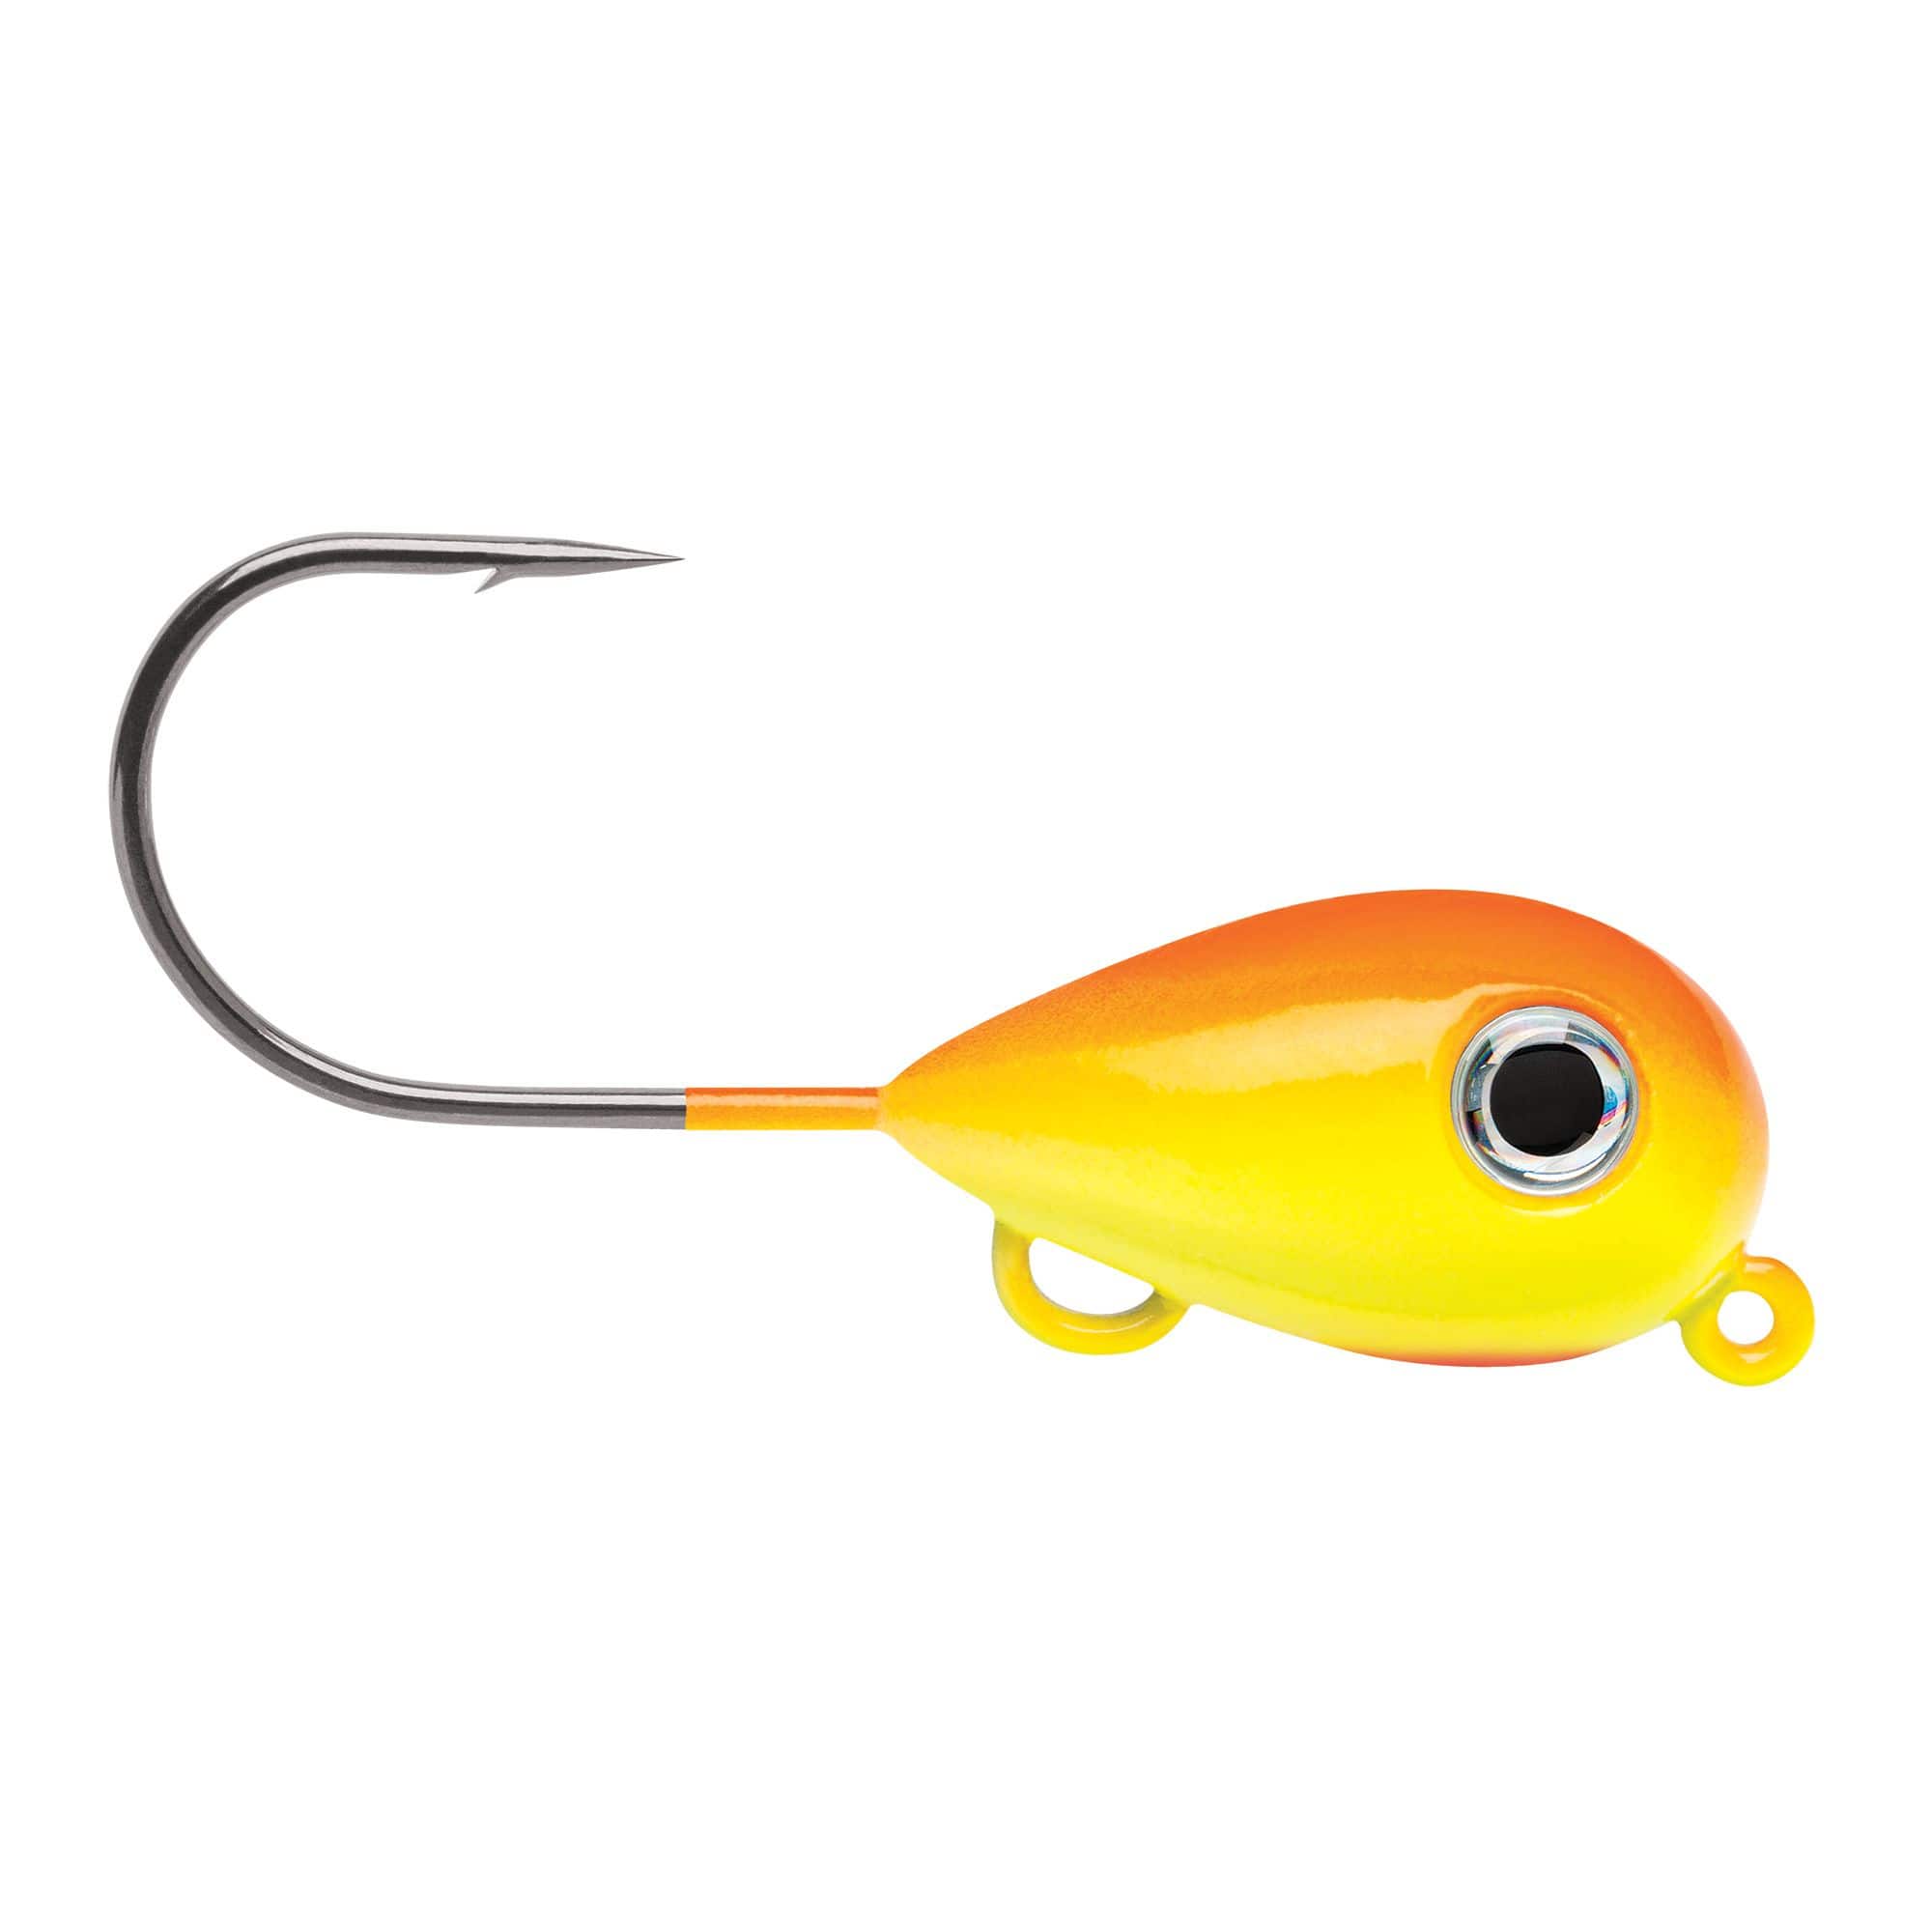 https://media-www.canadiantire.ca/product/playing/fishing/fishing-lures/1785156/vmc-hover-floating-jig-1-0-charteruse-orange-b176f586-980d-4df1-b89c-f0f9a3e83272-jpgrendition.jpg